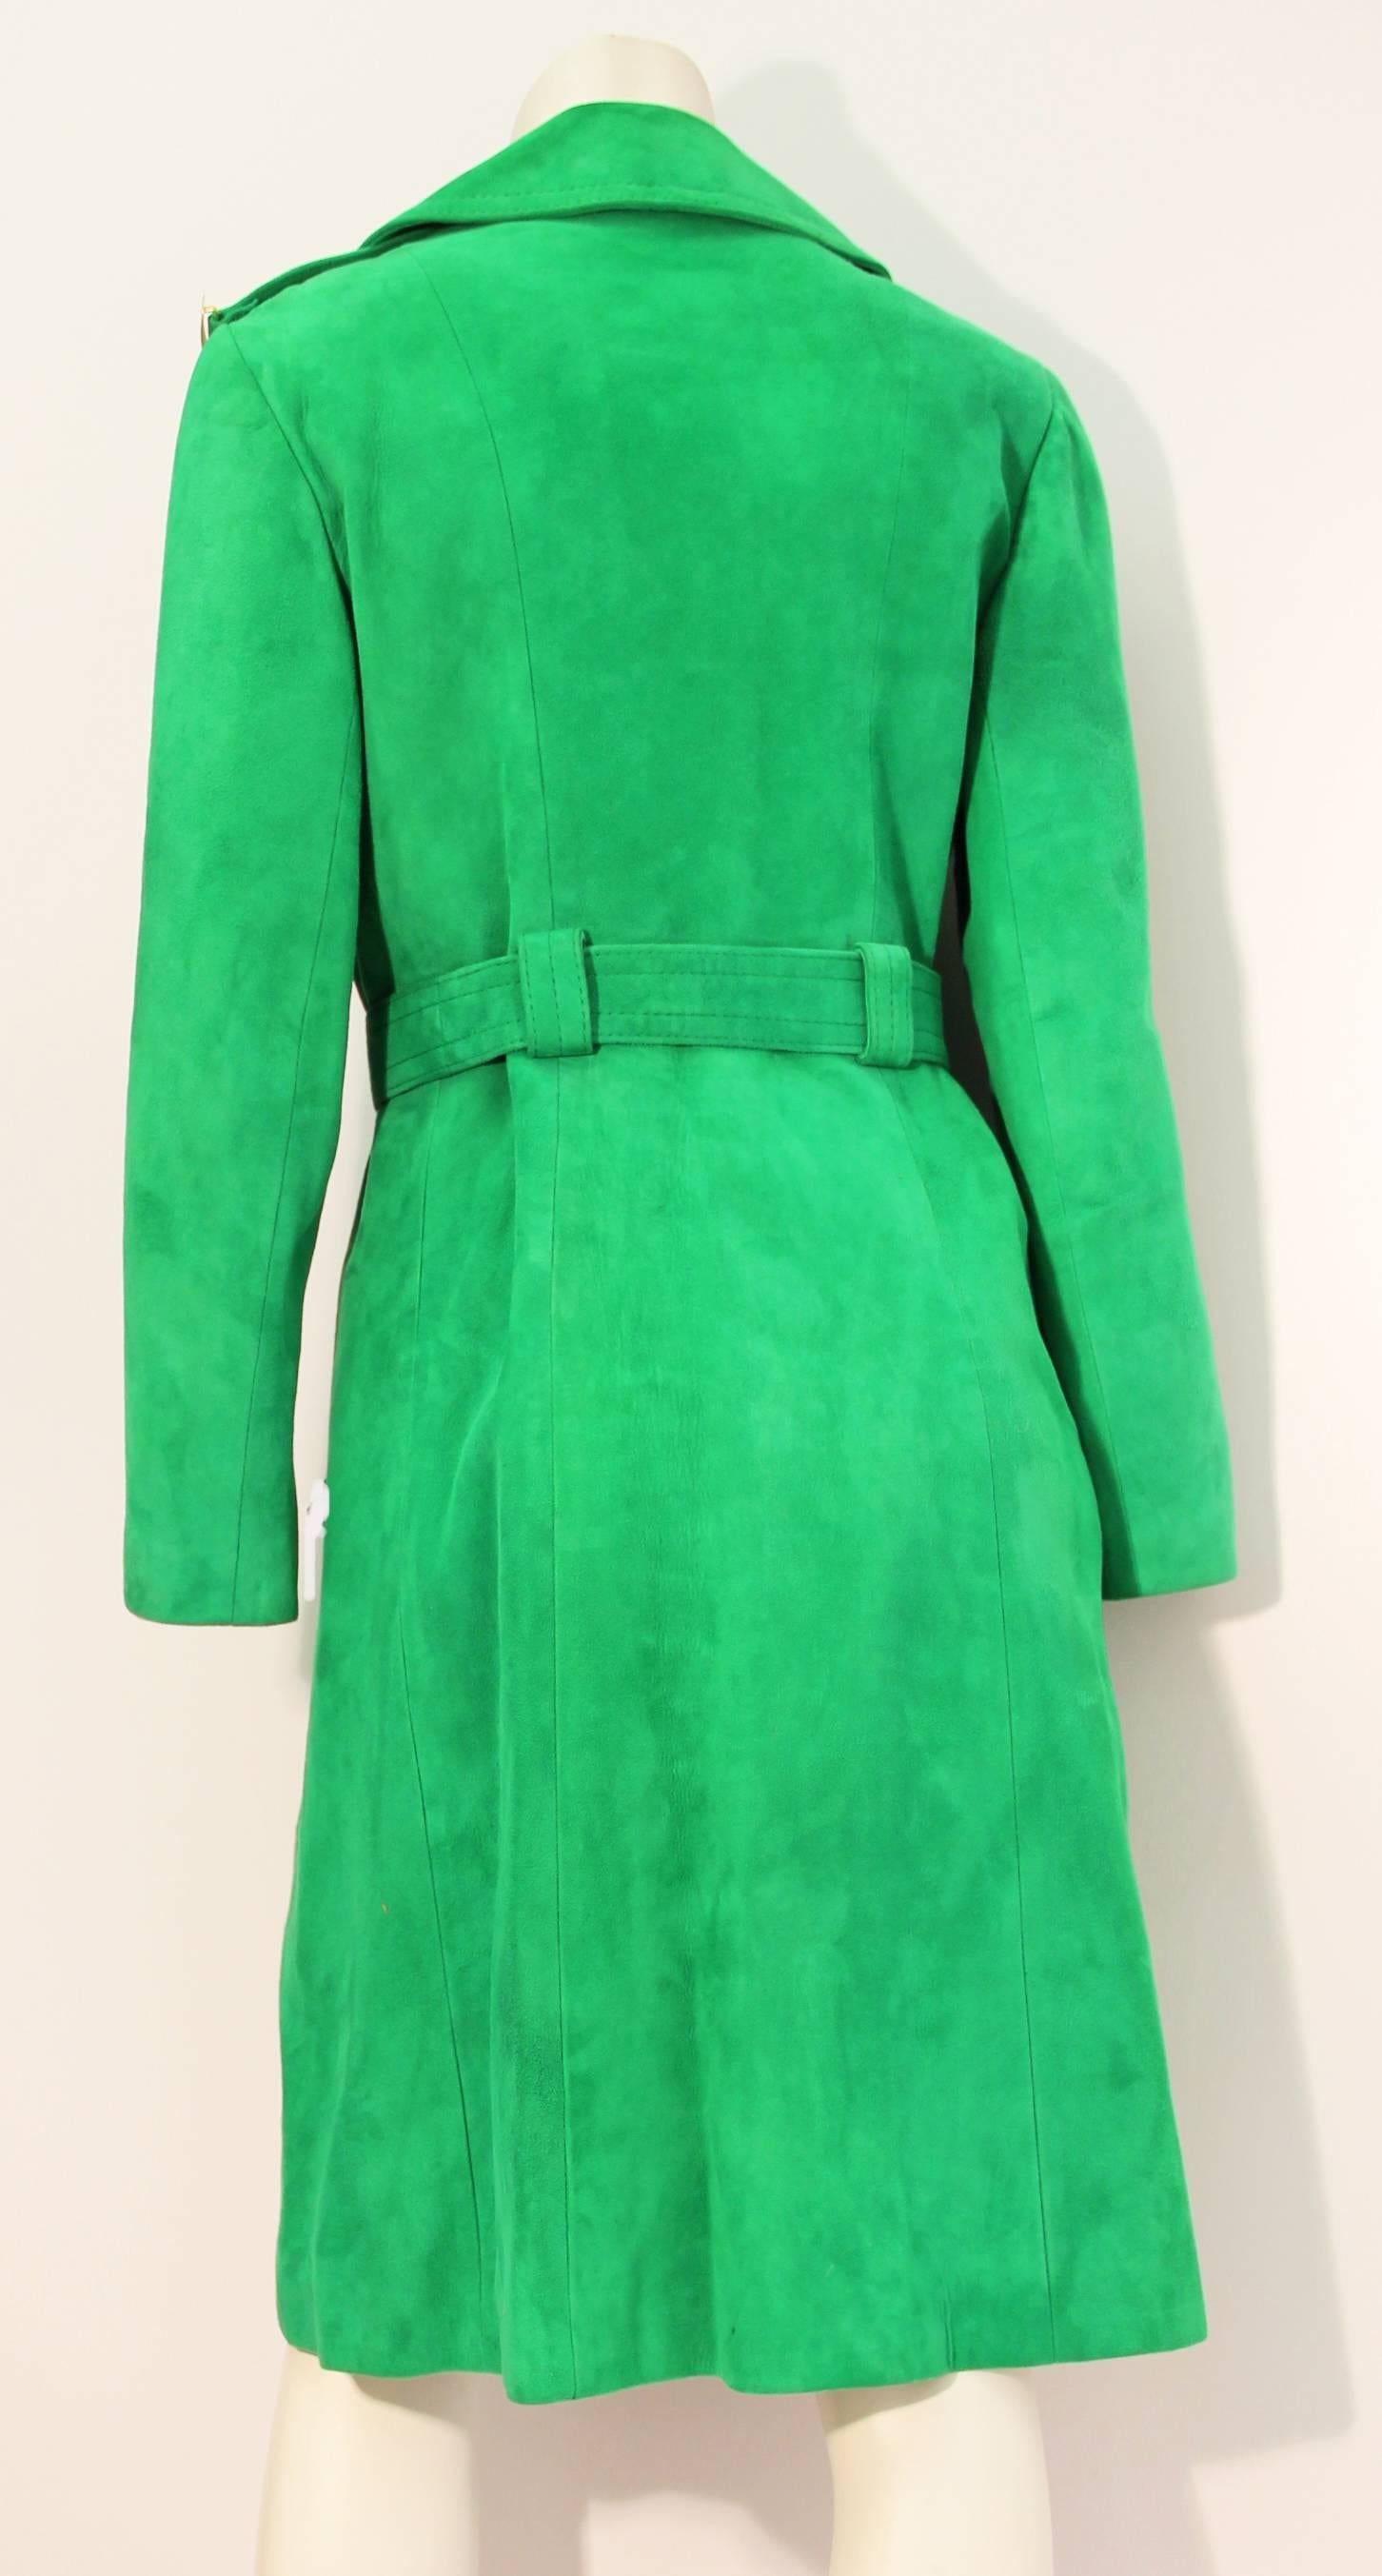 Exceptional 1970's green suede trench coat. Original brass buttons, hardware on shoulder epaulets and buckle. This is what Emma Peel would have worn in the hit British television series The Avengers. Absolutely Fabulous! 

Size: Approximately a